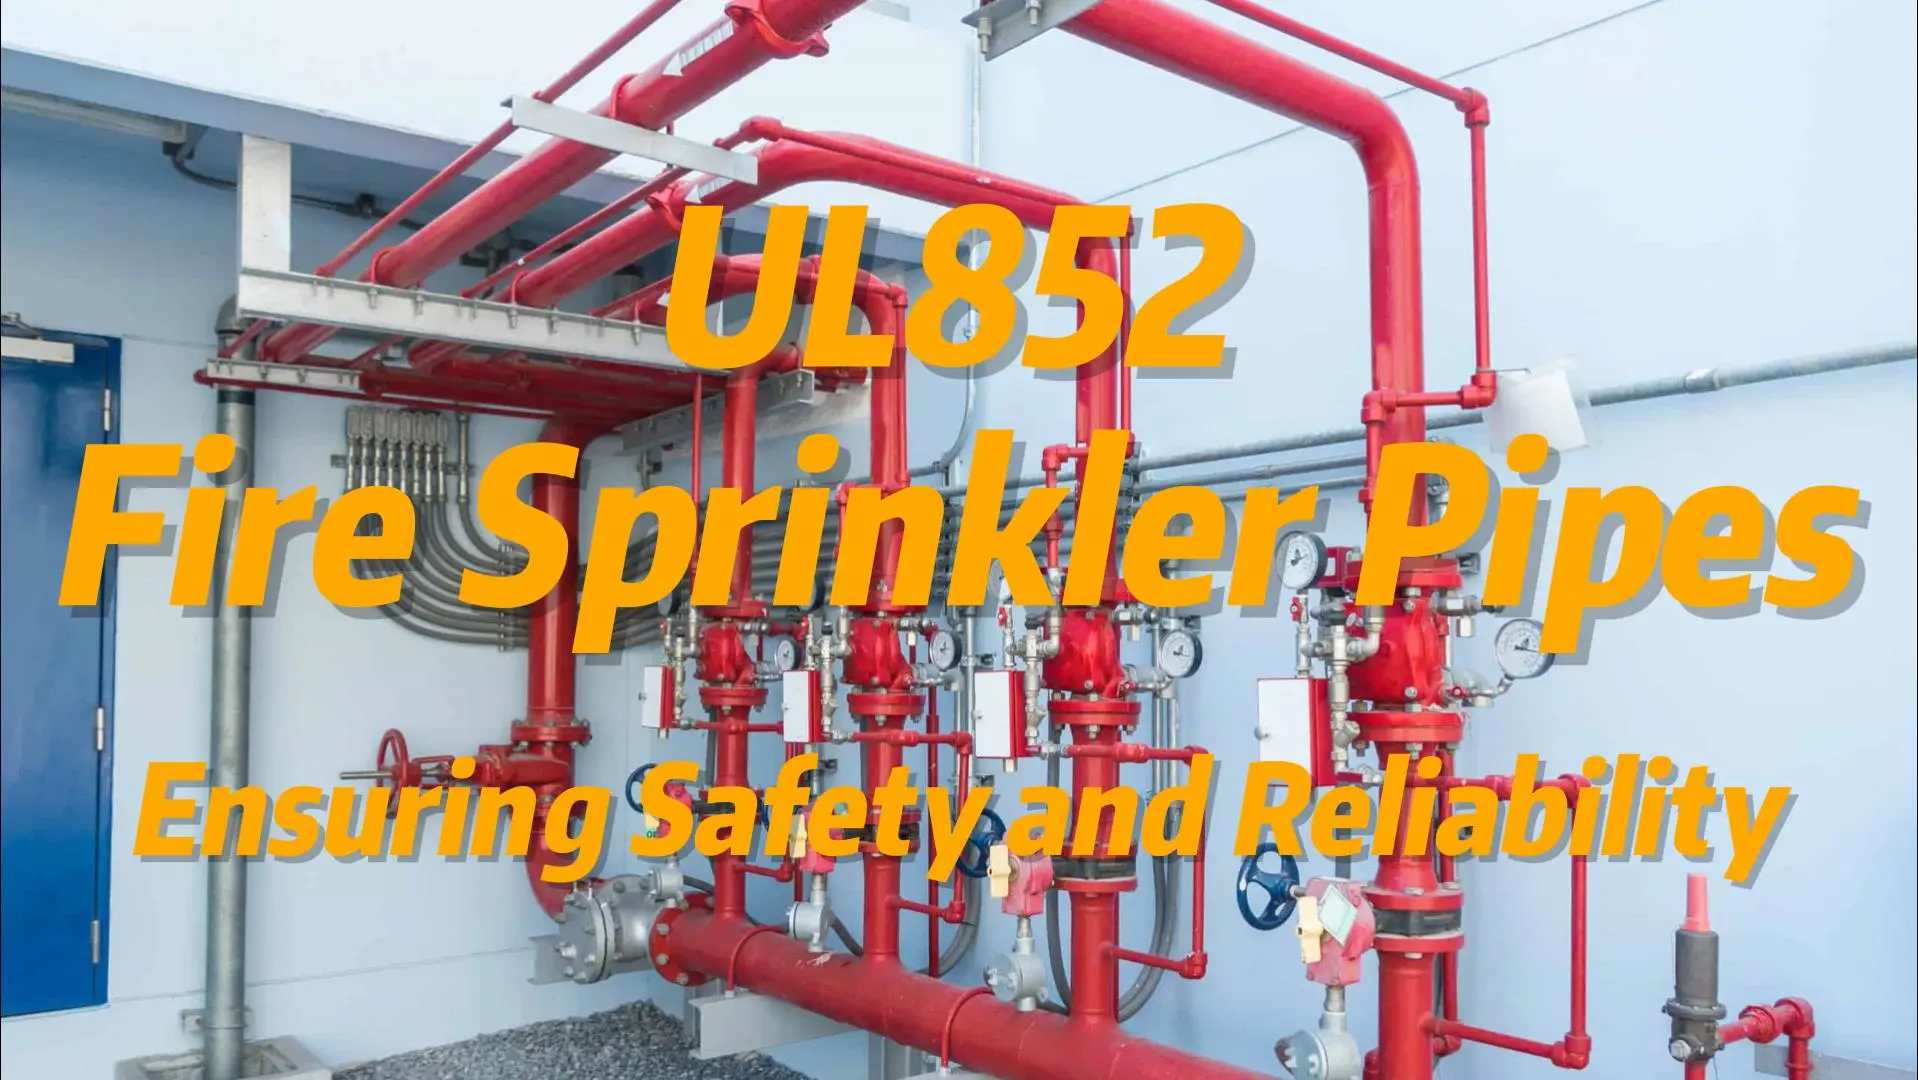 UL852 Fire Sprinkler Pipes: Ensuring Safety and Reliability